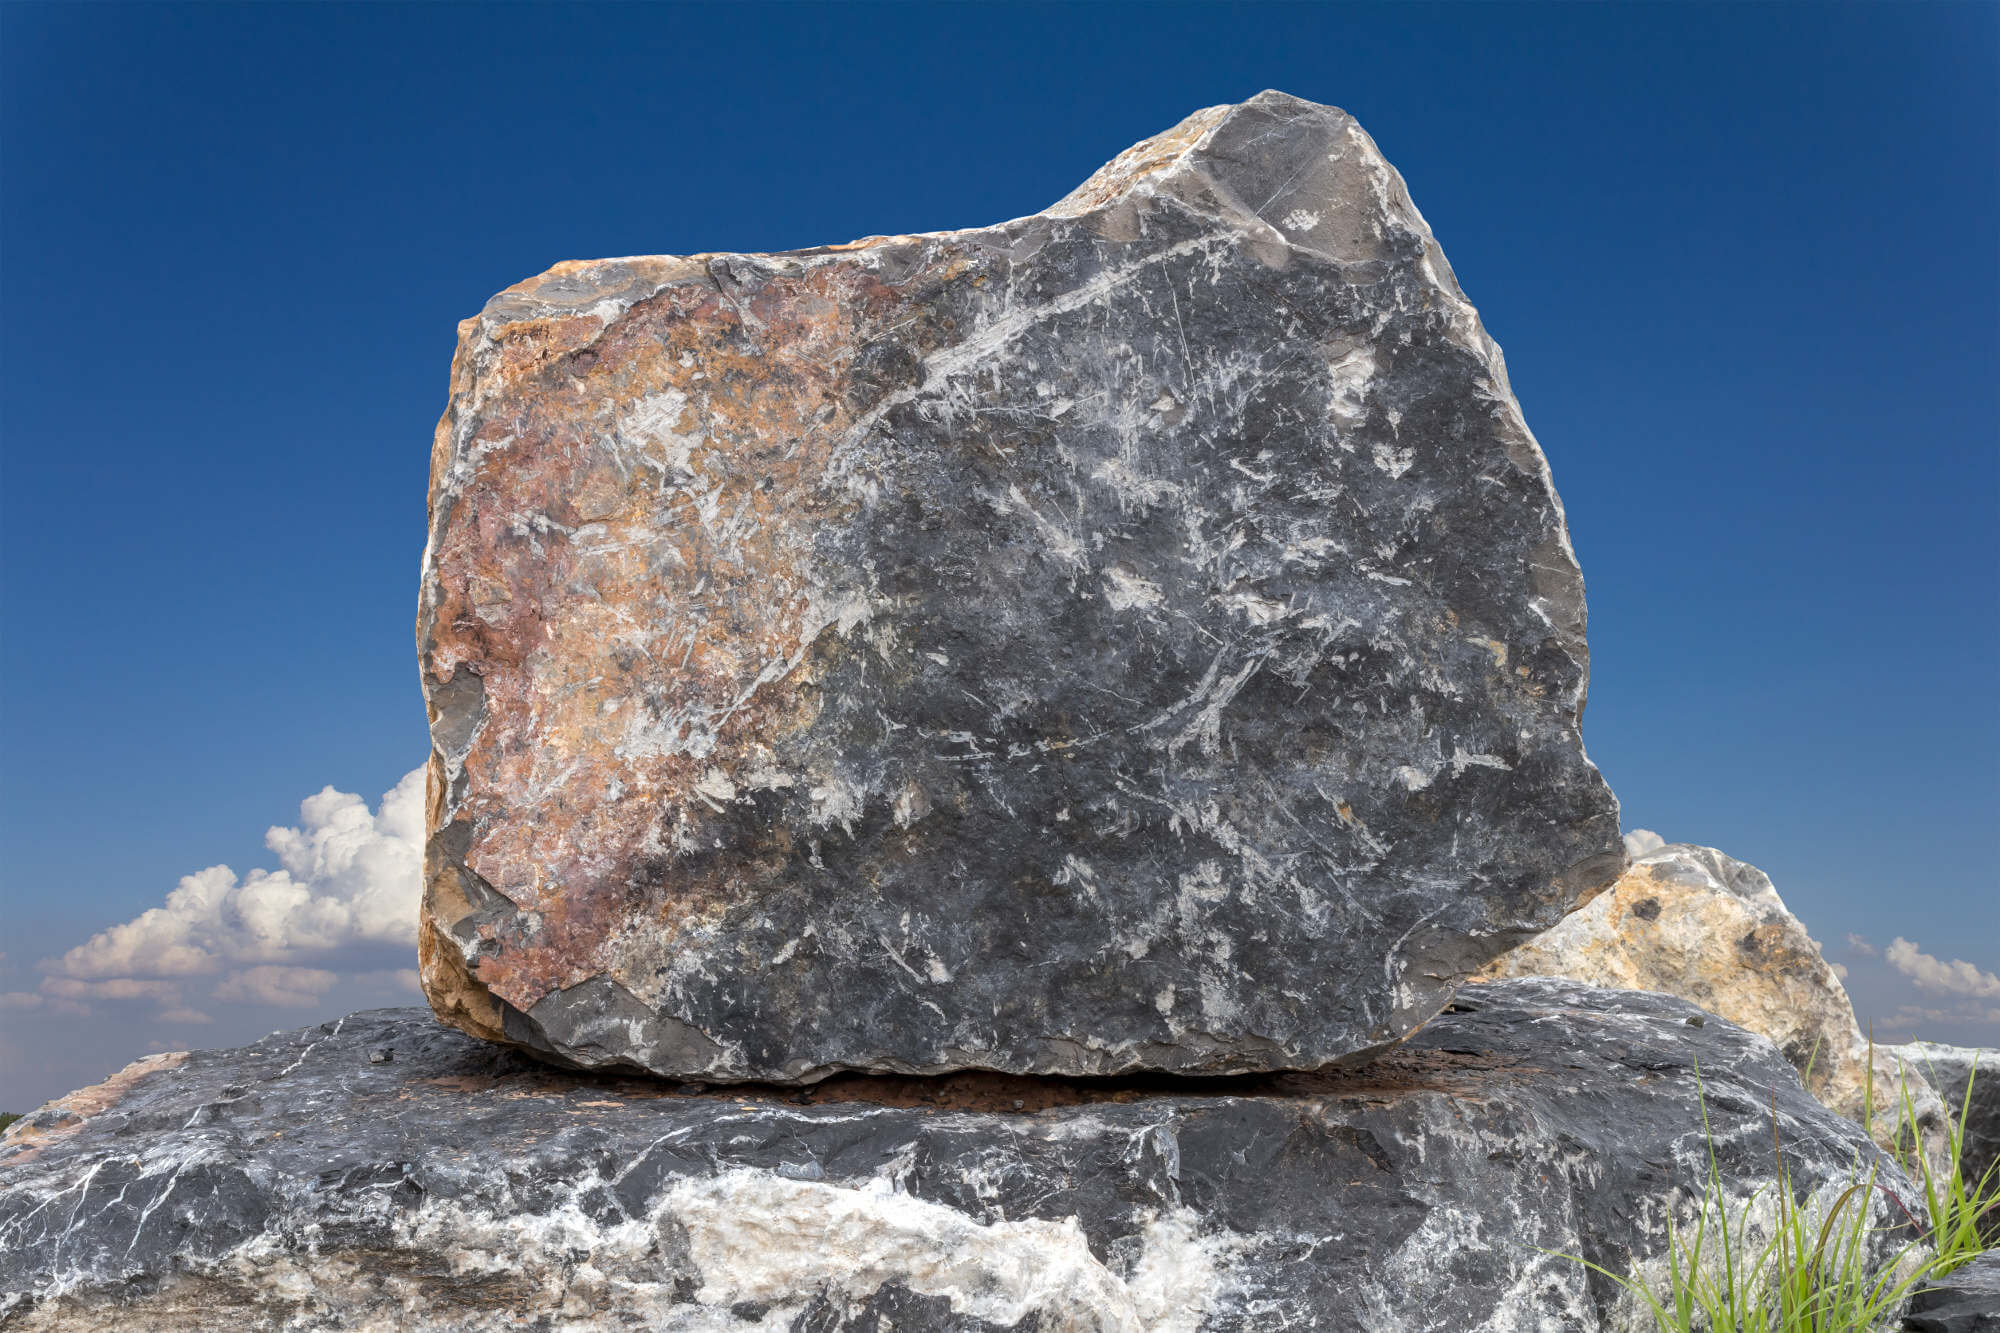 Large granite rock, with clouds and blue sky as backdrop